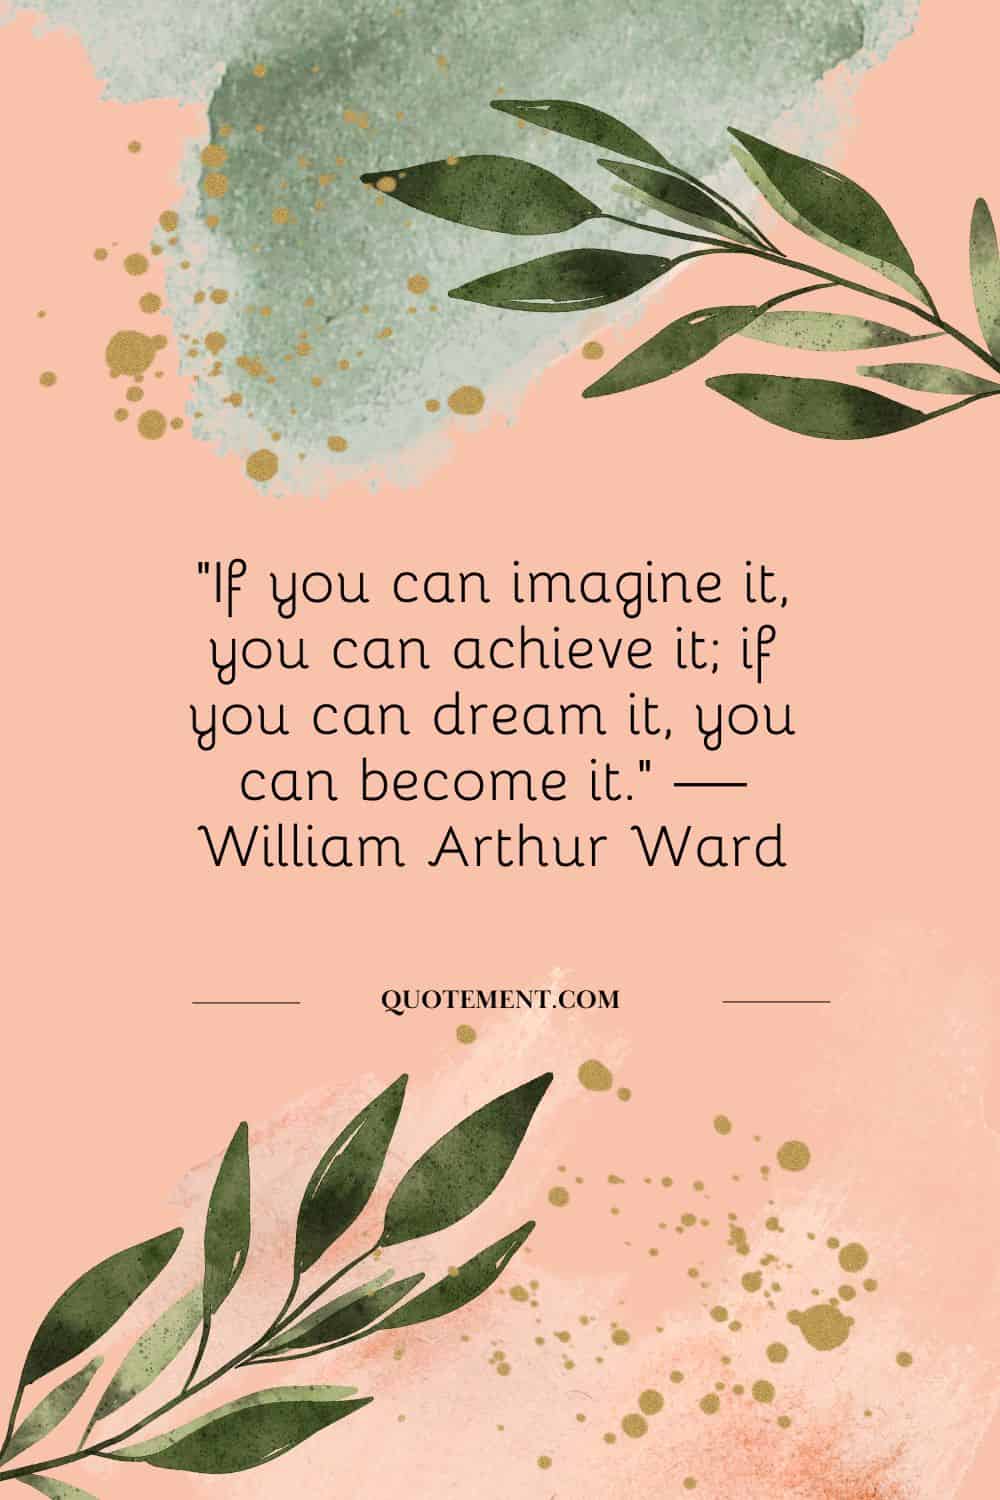 “If you can imagine it, you can achieve it; if you can dream it, you can become it.” — William Arthur Ward